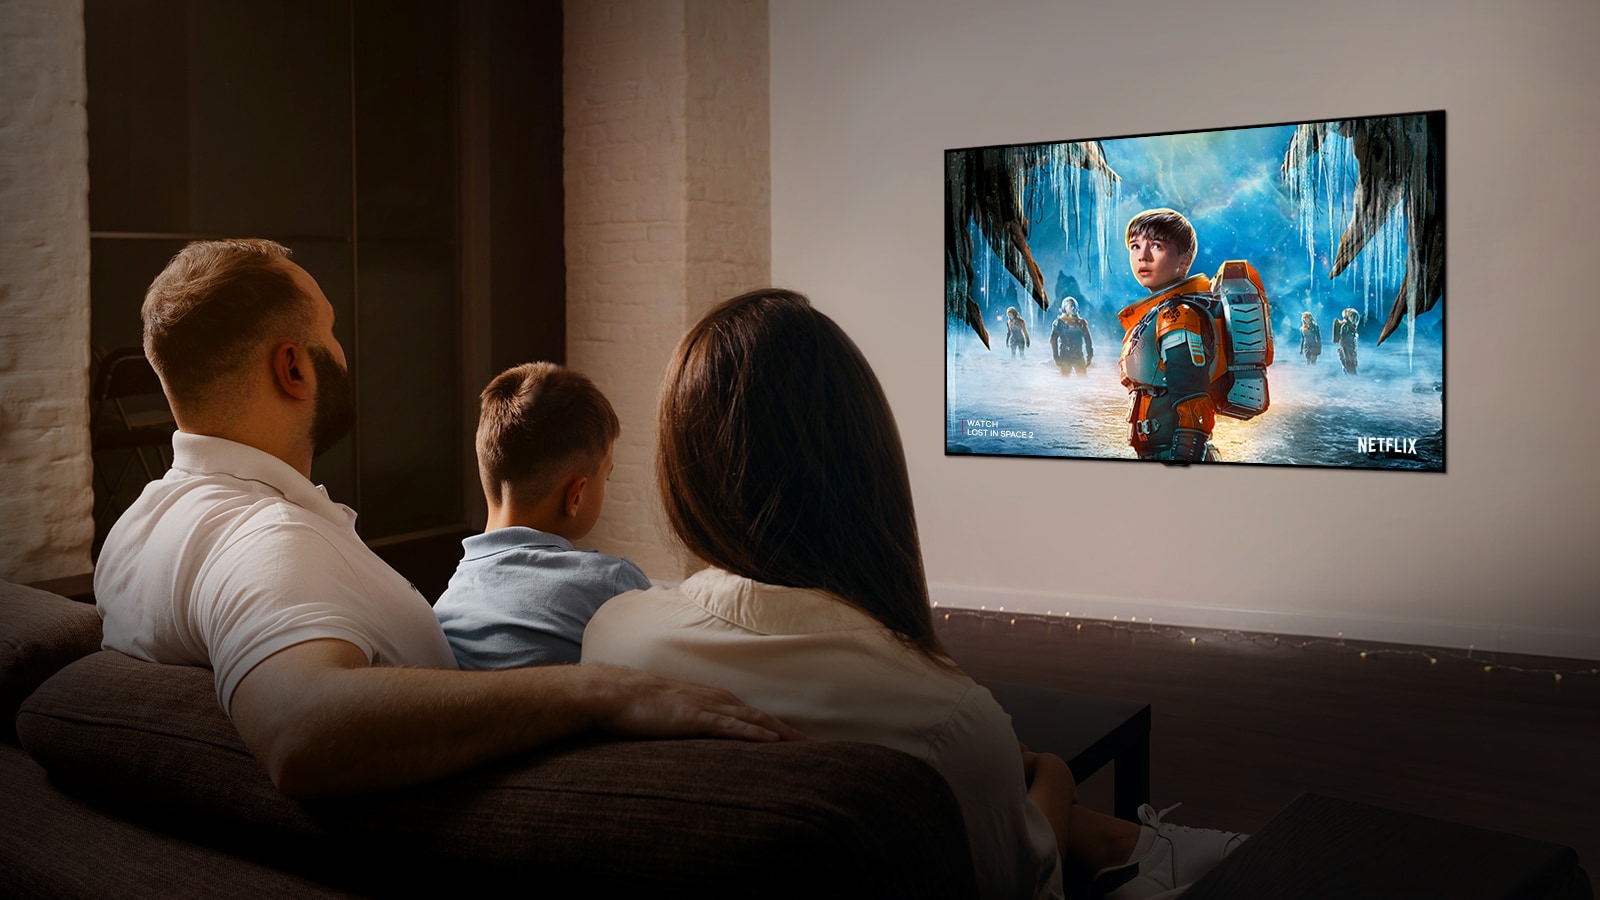 OLED makes home the best movie theatre1